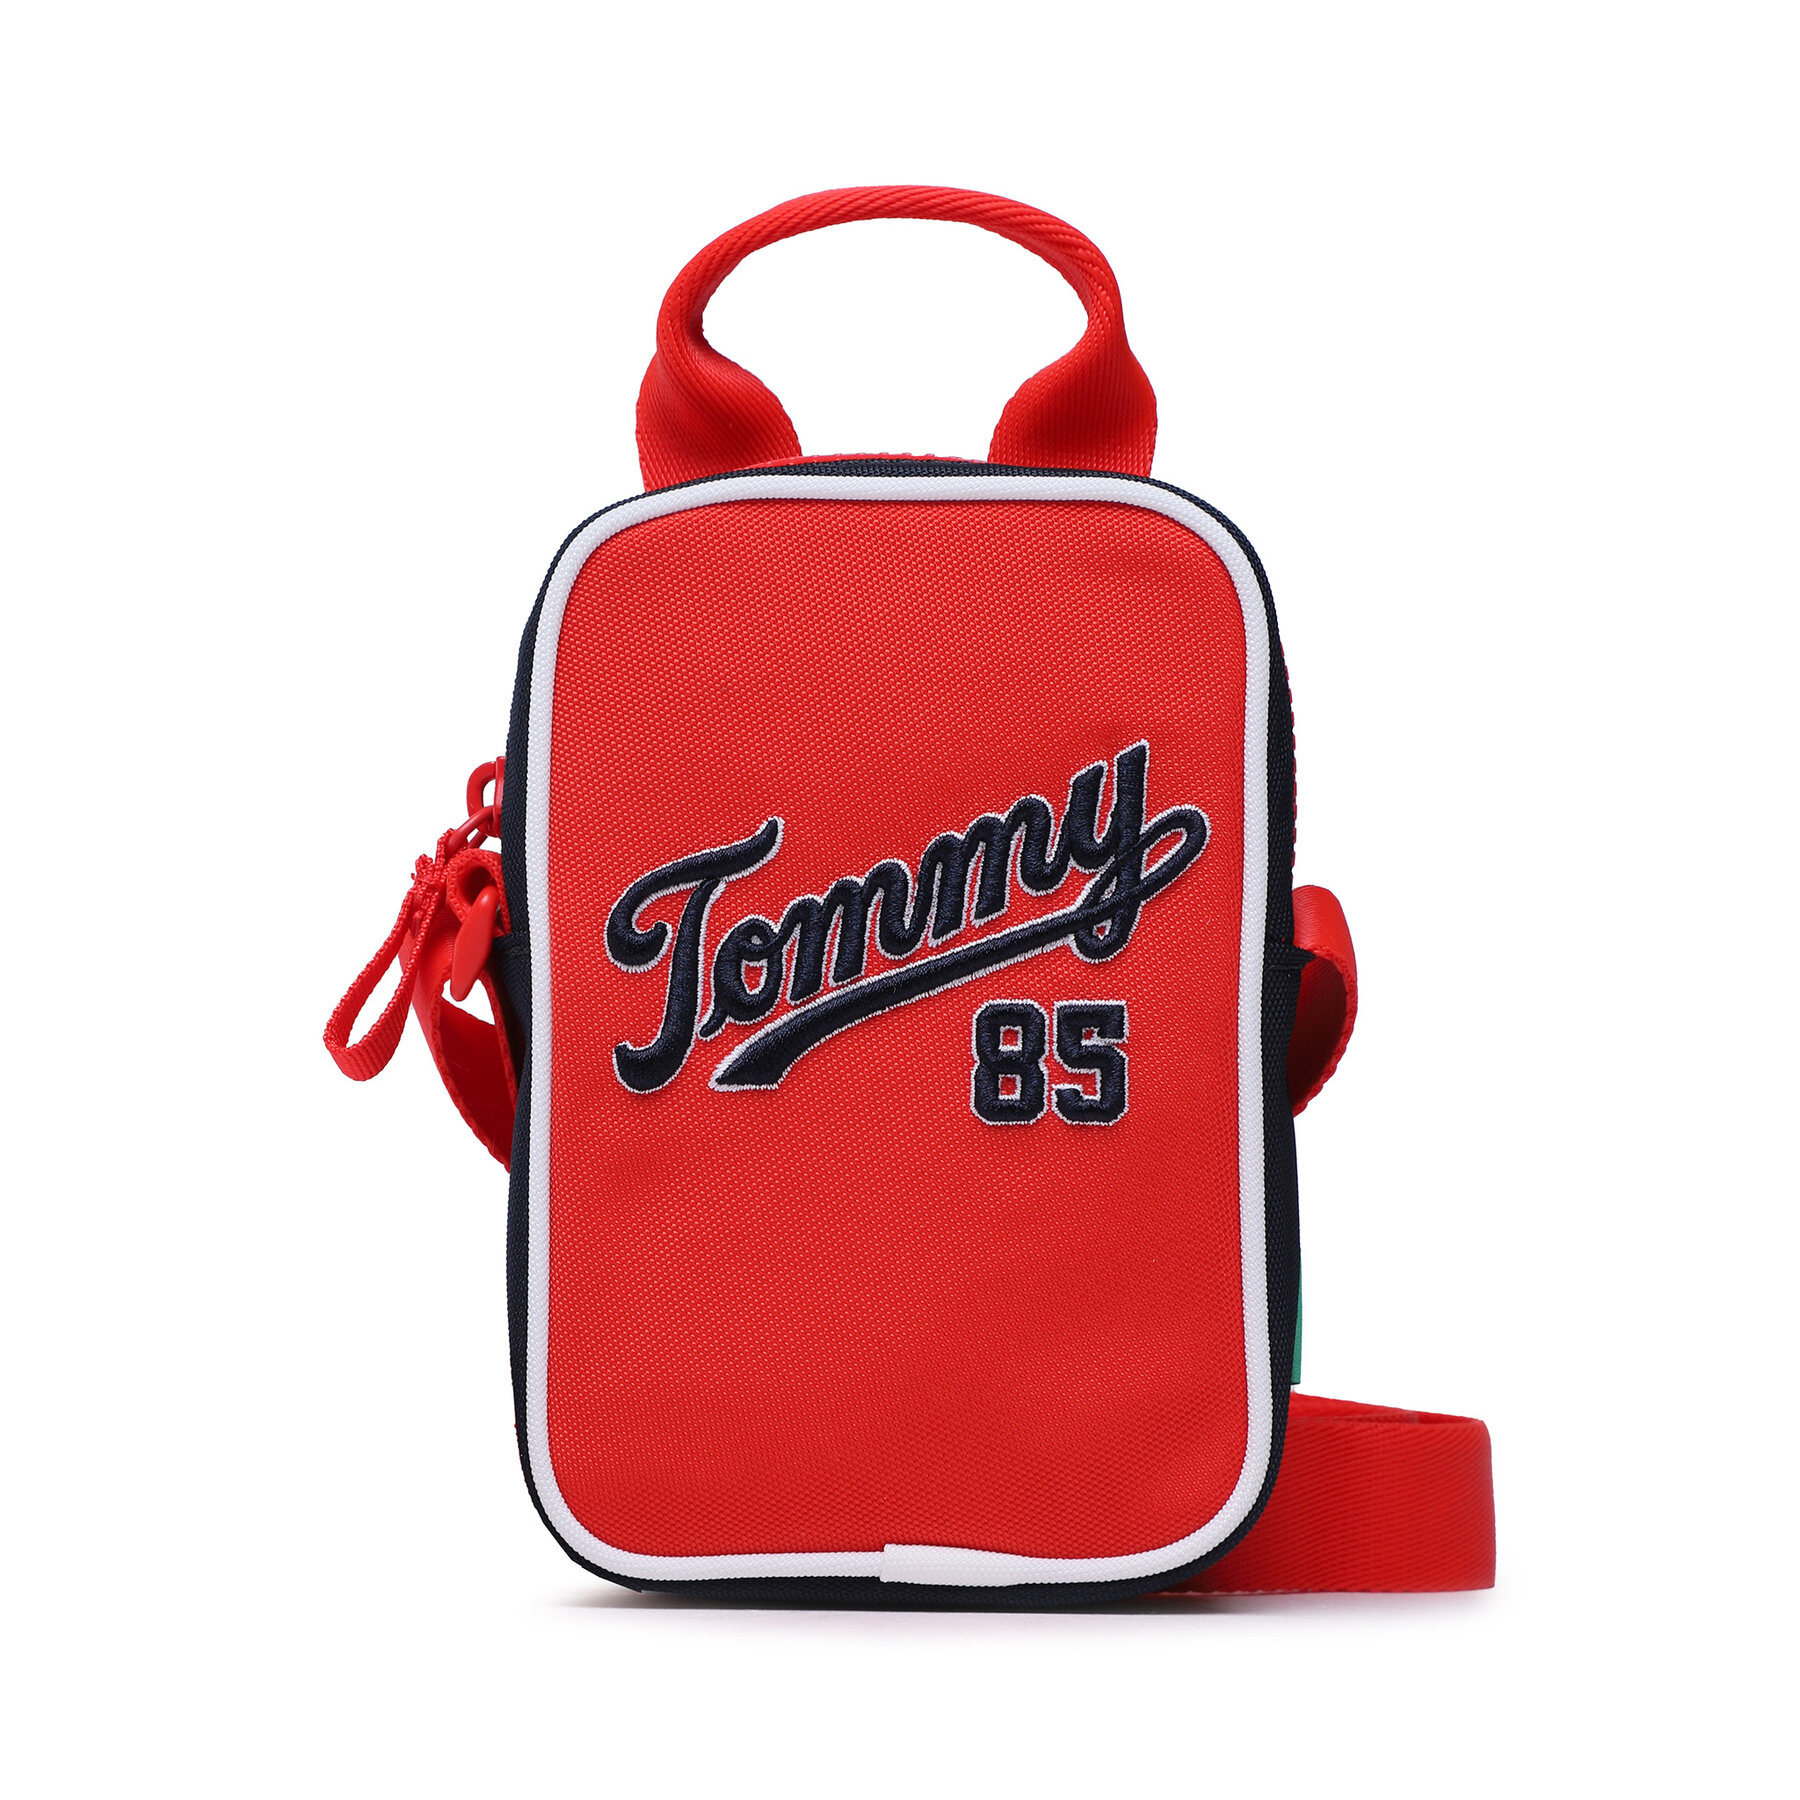 Umhängetasche Tommy Jeans Tommy Logo 85 Crossover AU0AU01549 DW6 von Tommy Jeans